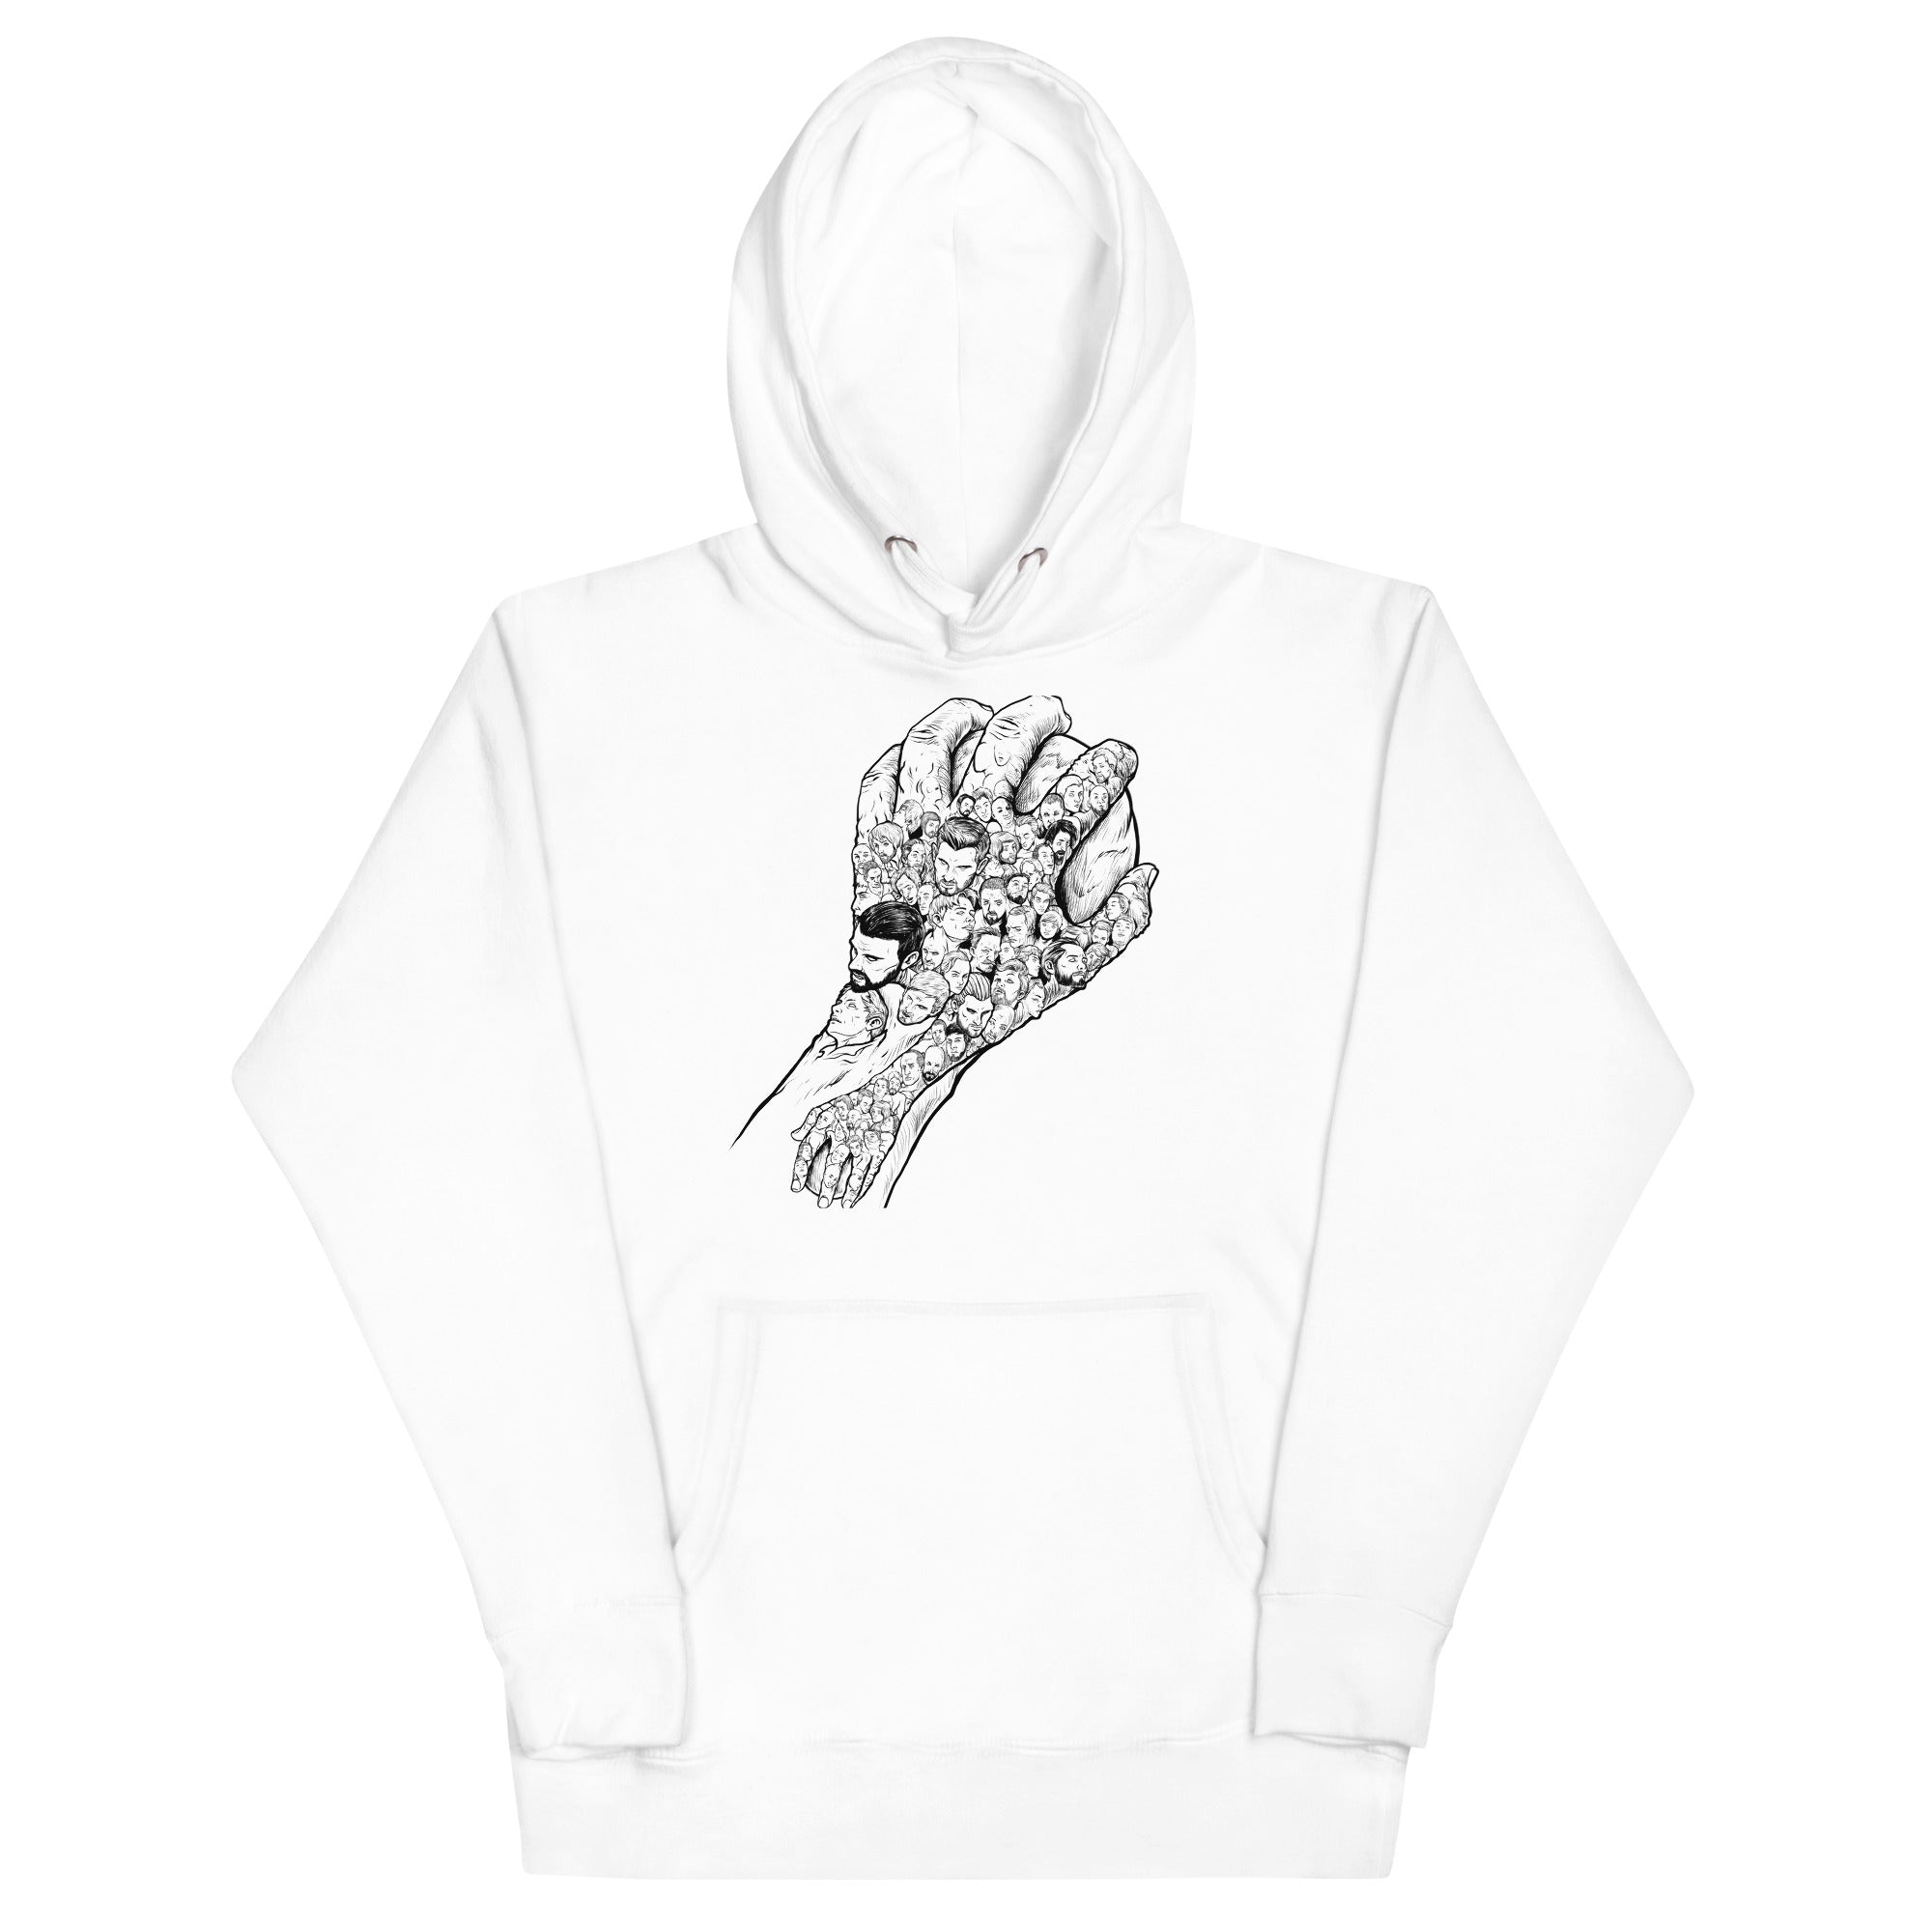 Hand and Face Unisex Hoodie